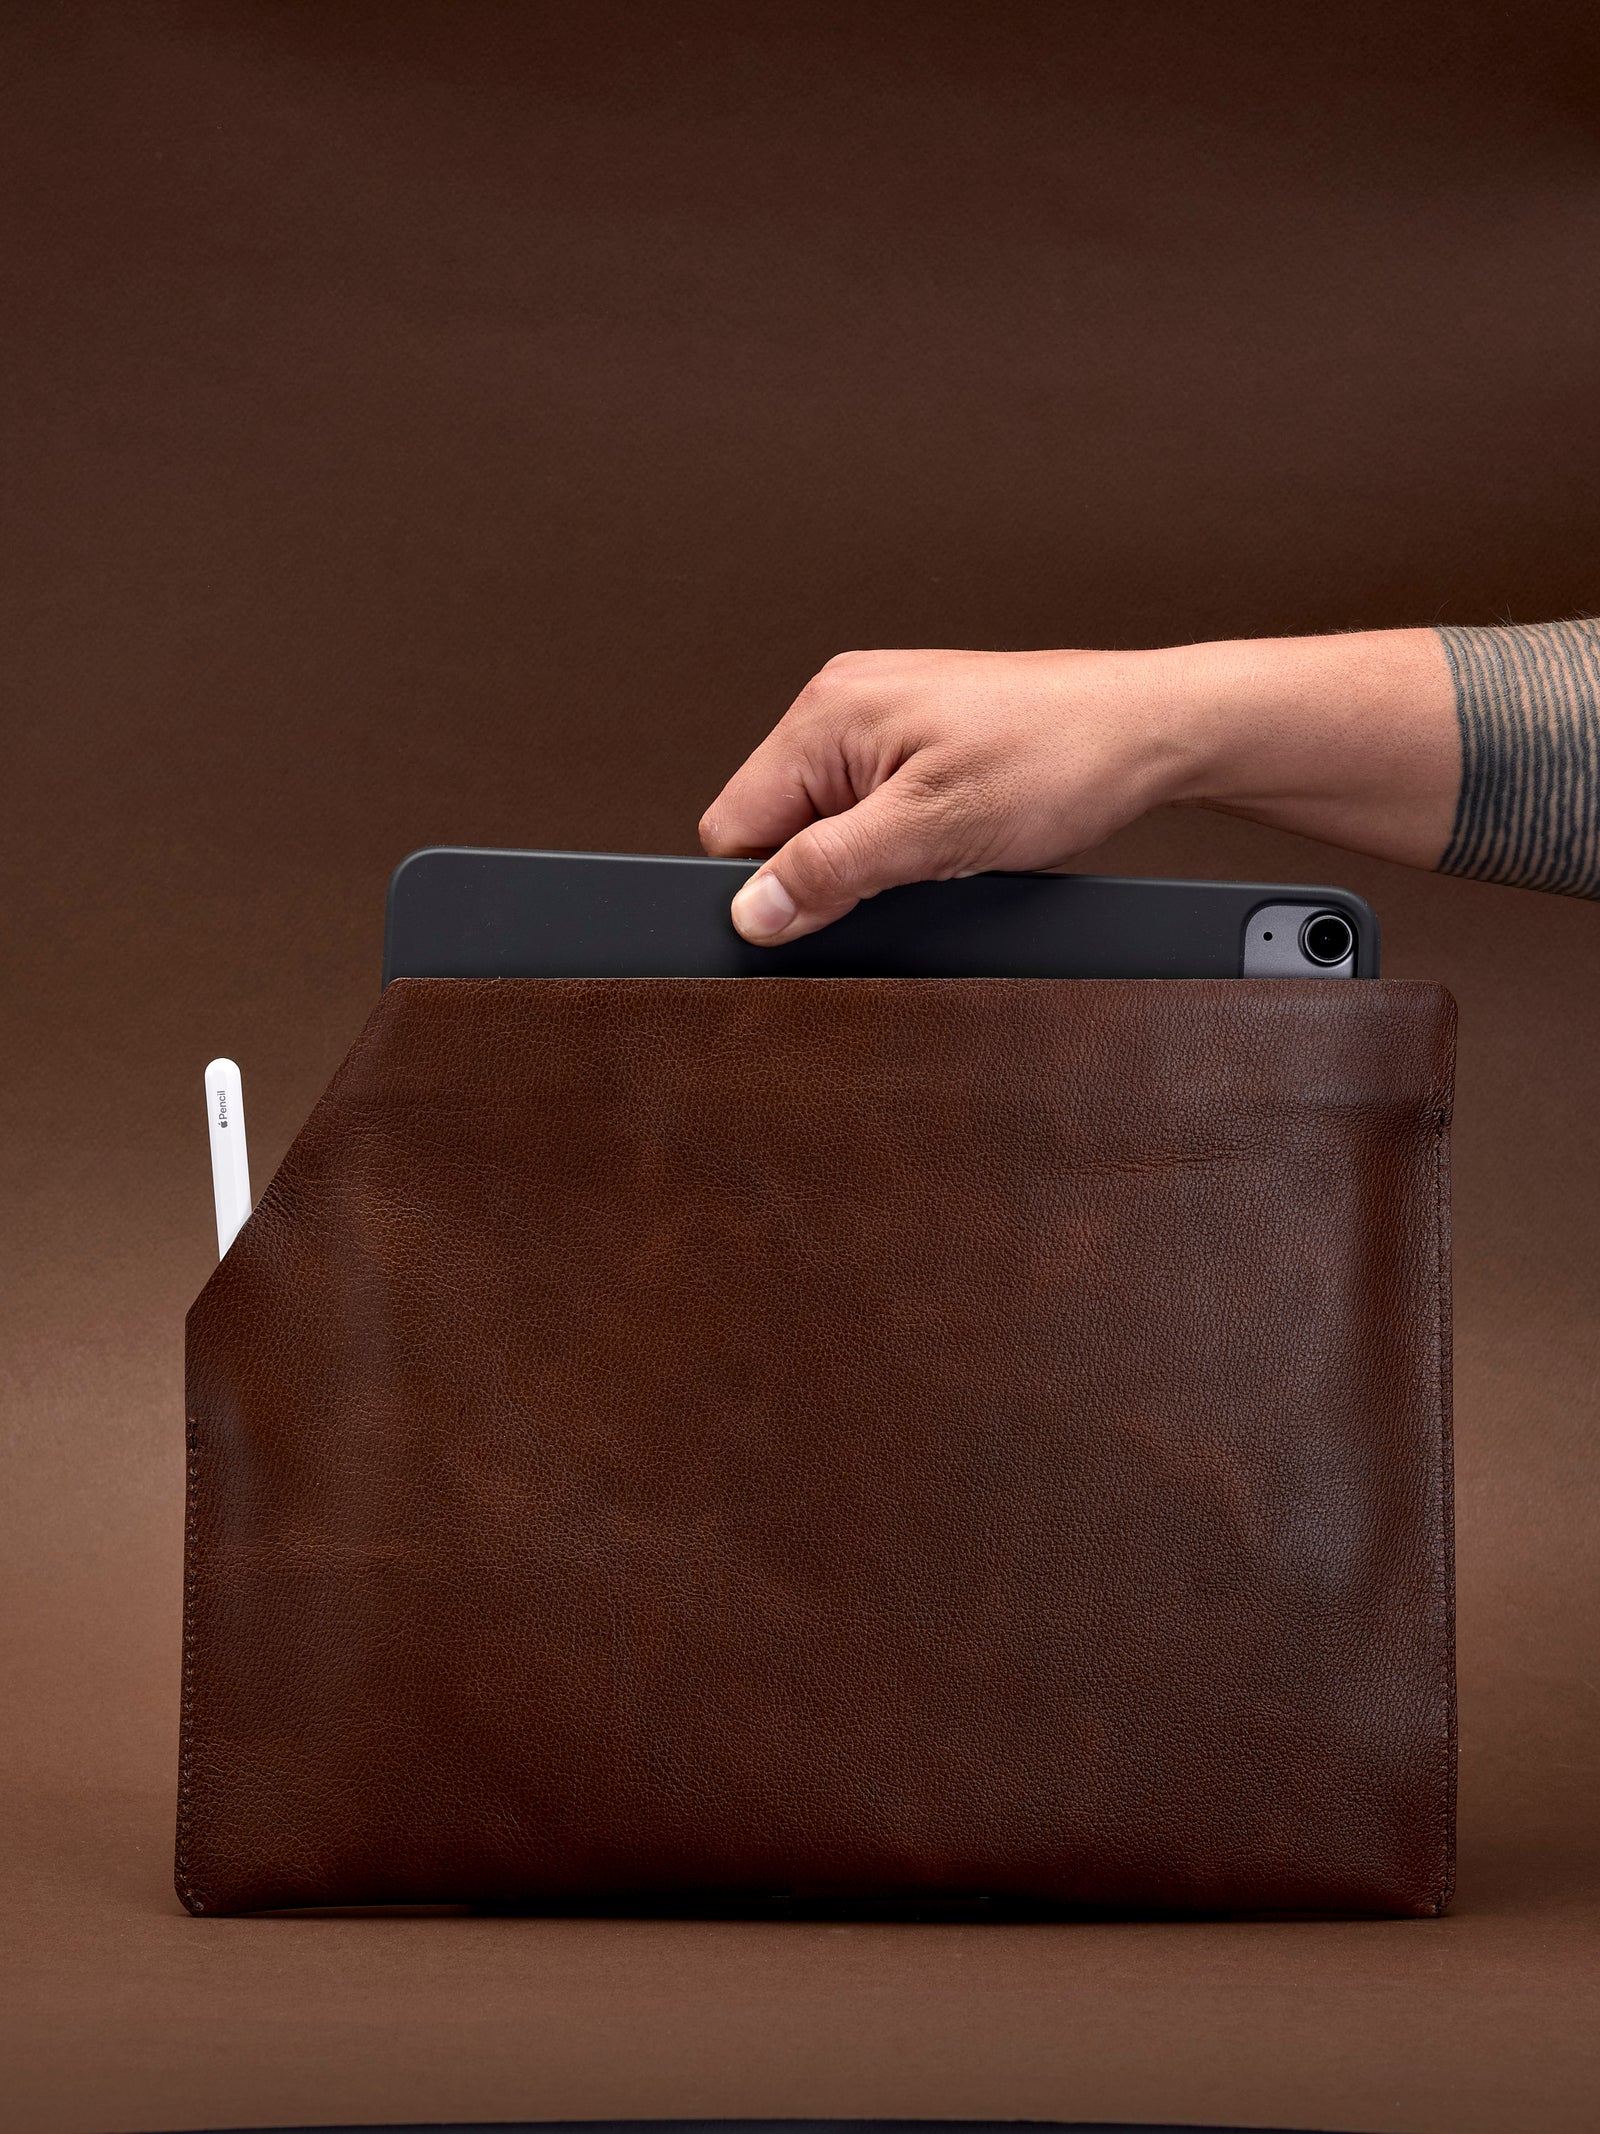 Front view. Draftsman 7 iPad Sleeve Cover Brown, iPad Pro 11-inch, iPad Pro 12.9-inch, M1 Chip by Capra Leather